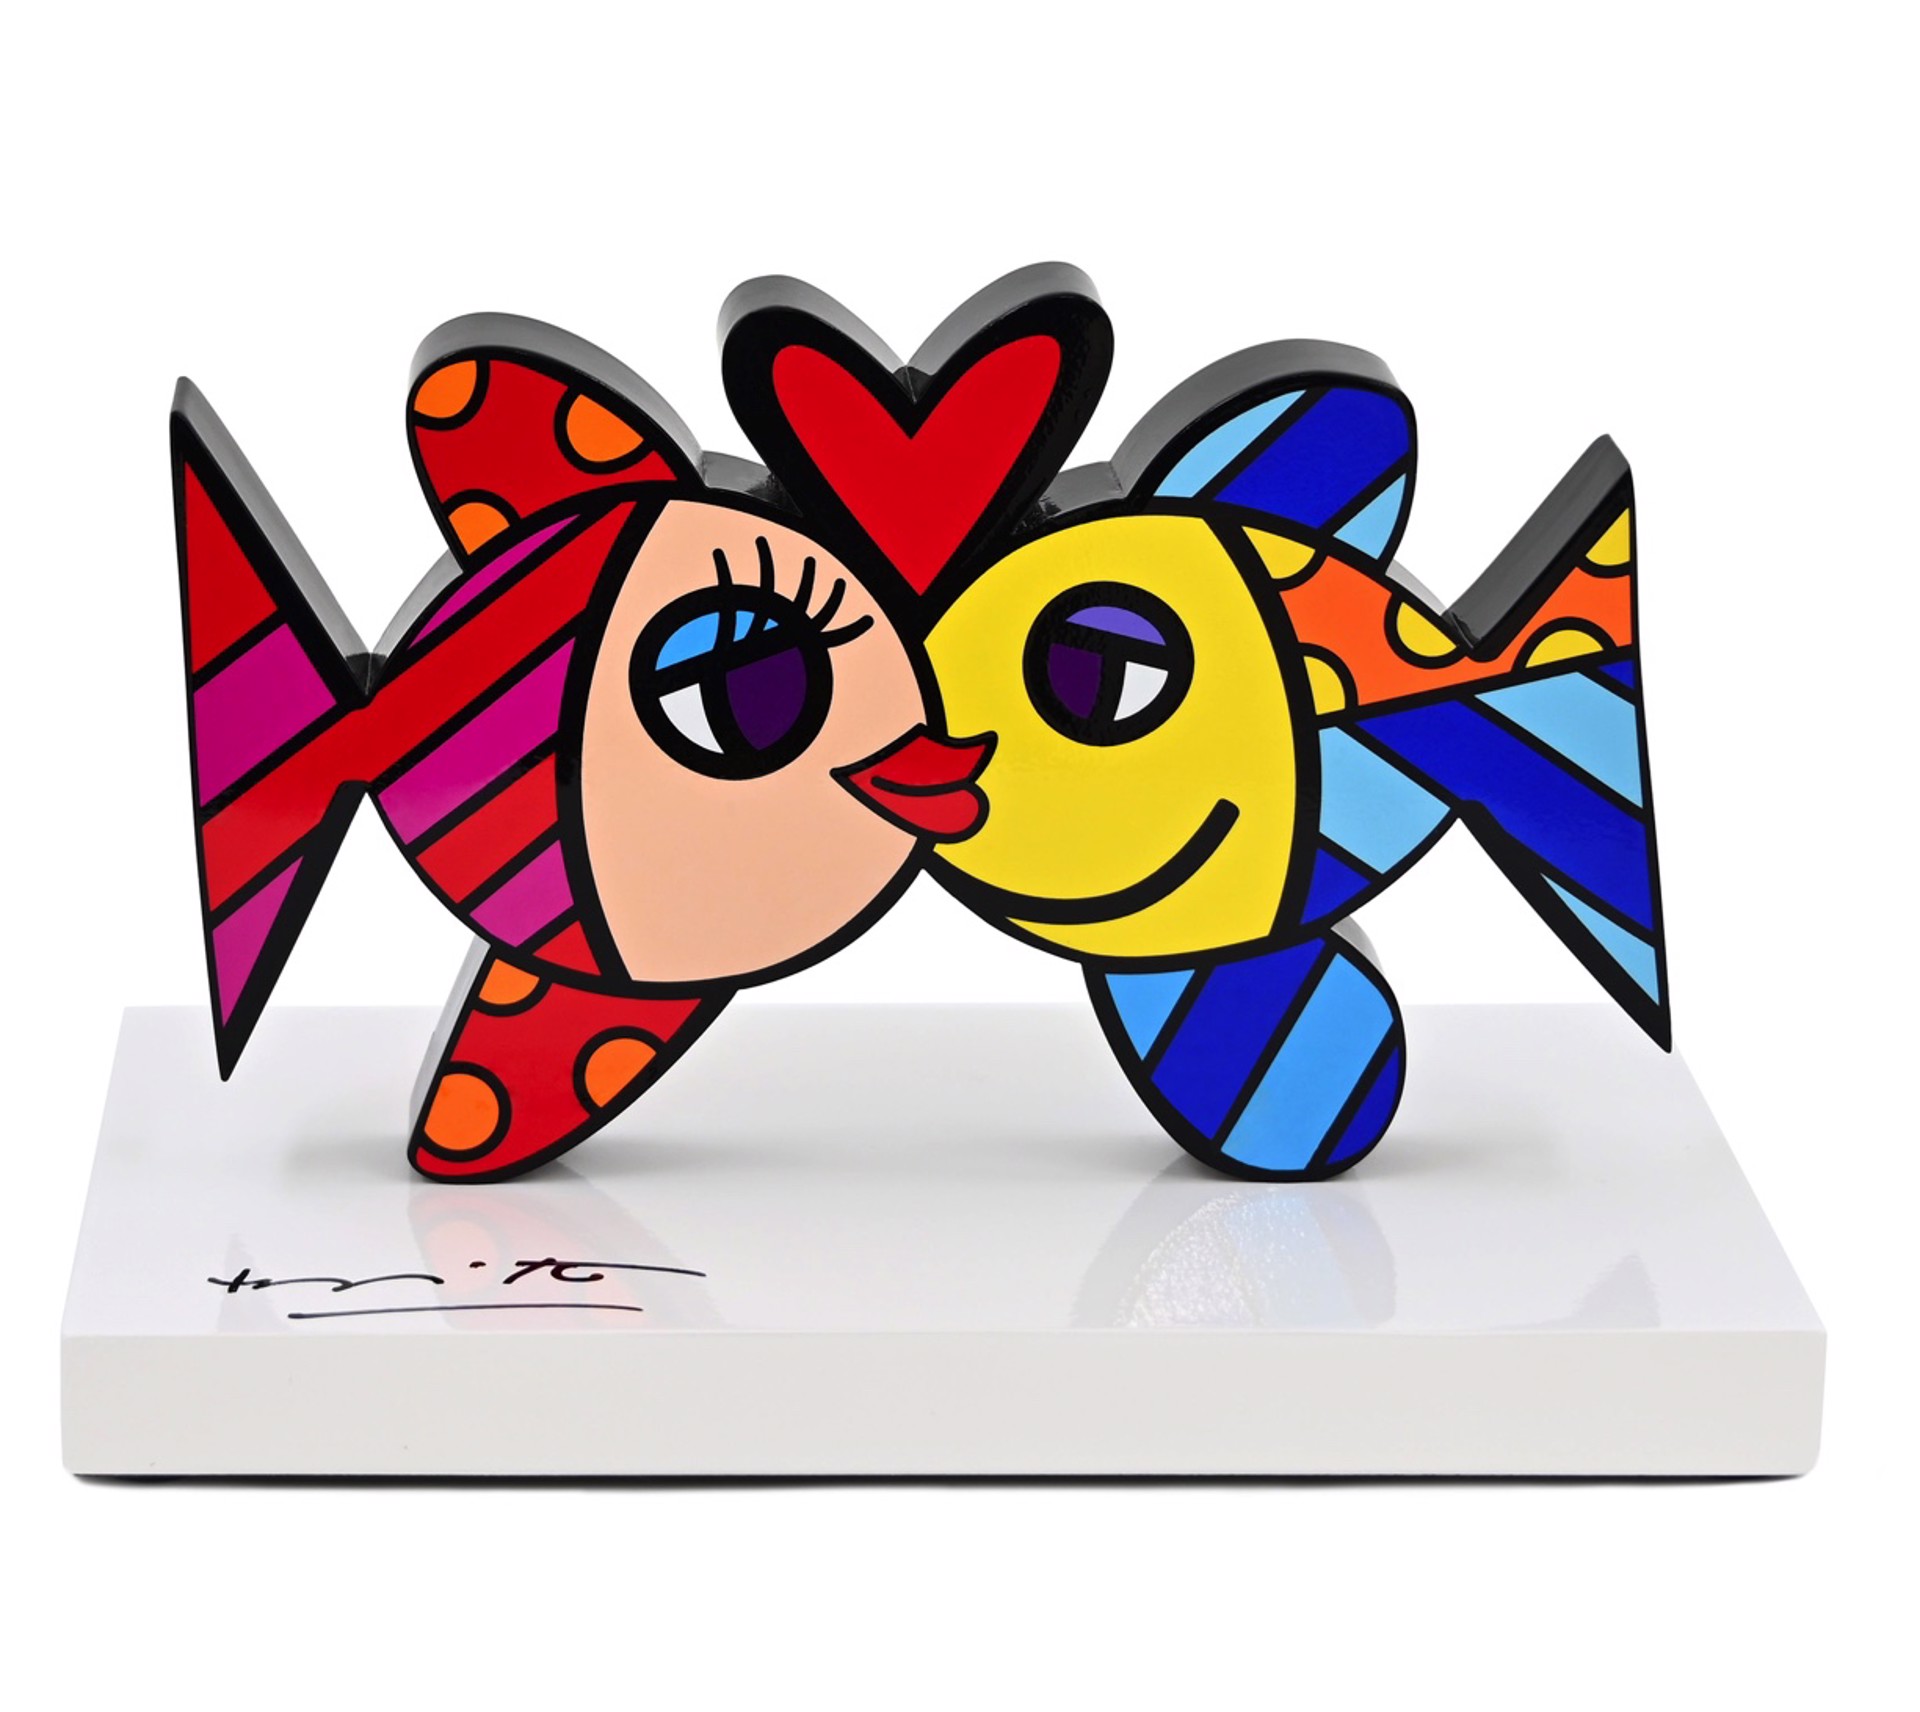 DEEPLY IN LOVE (WHITE BASE) - LIMITED EDITION SCULPTURE by Romero Britto